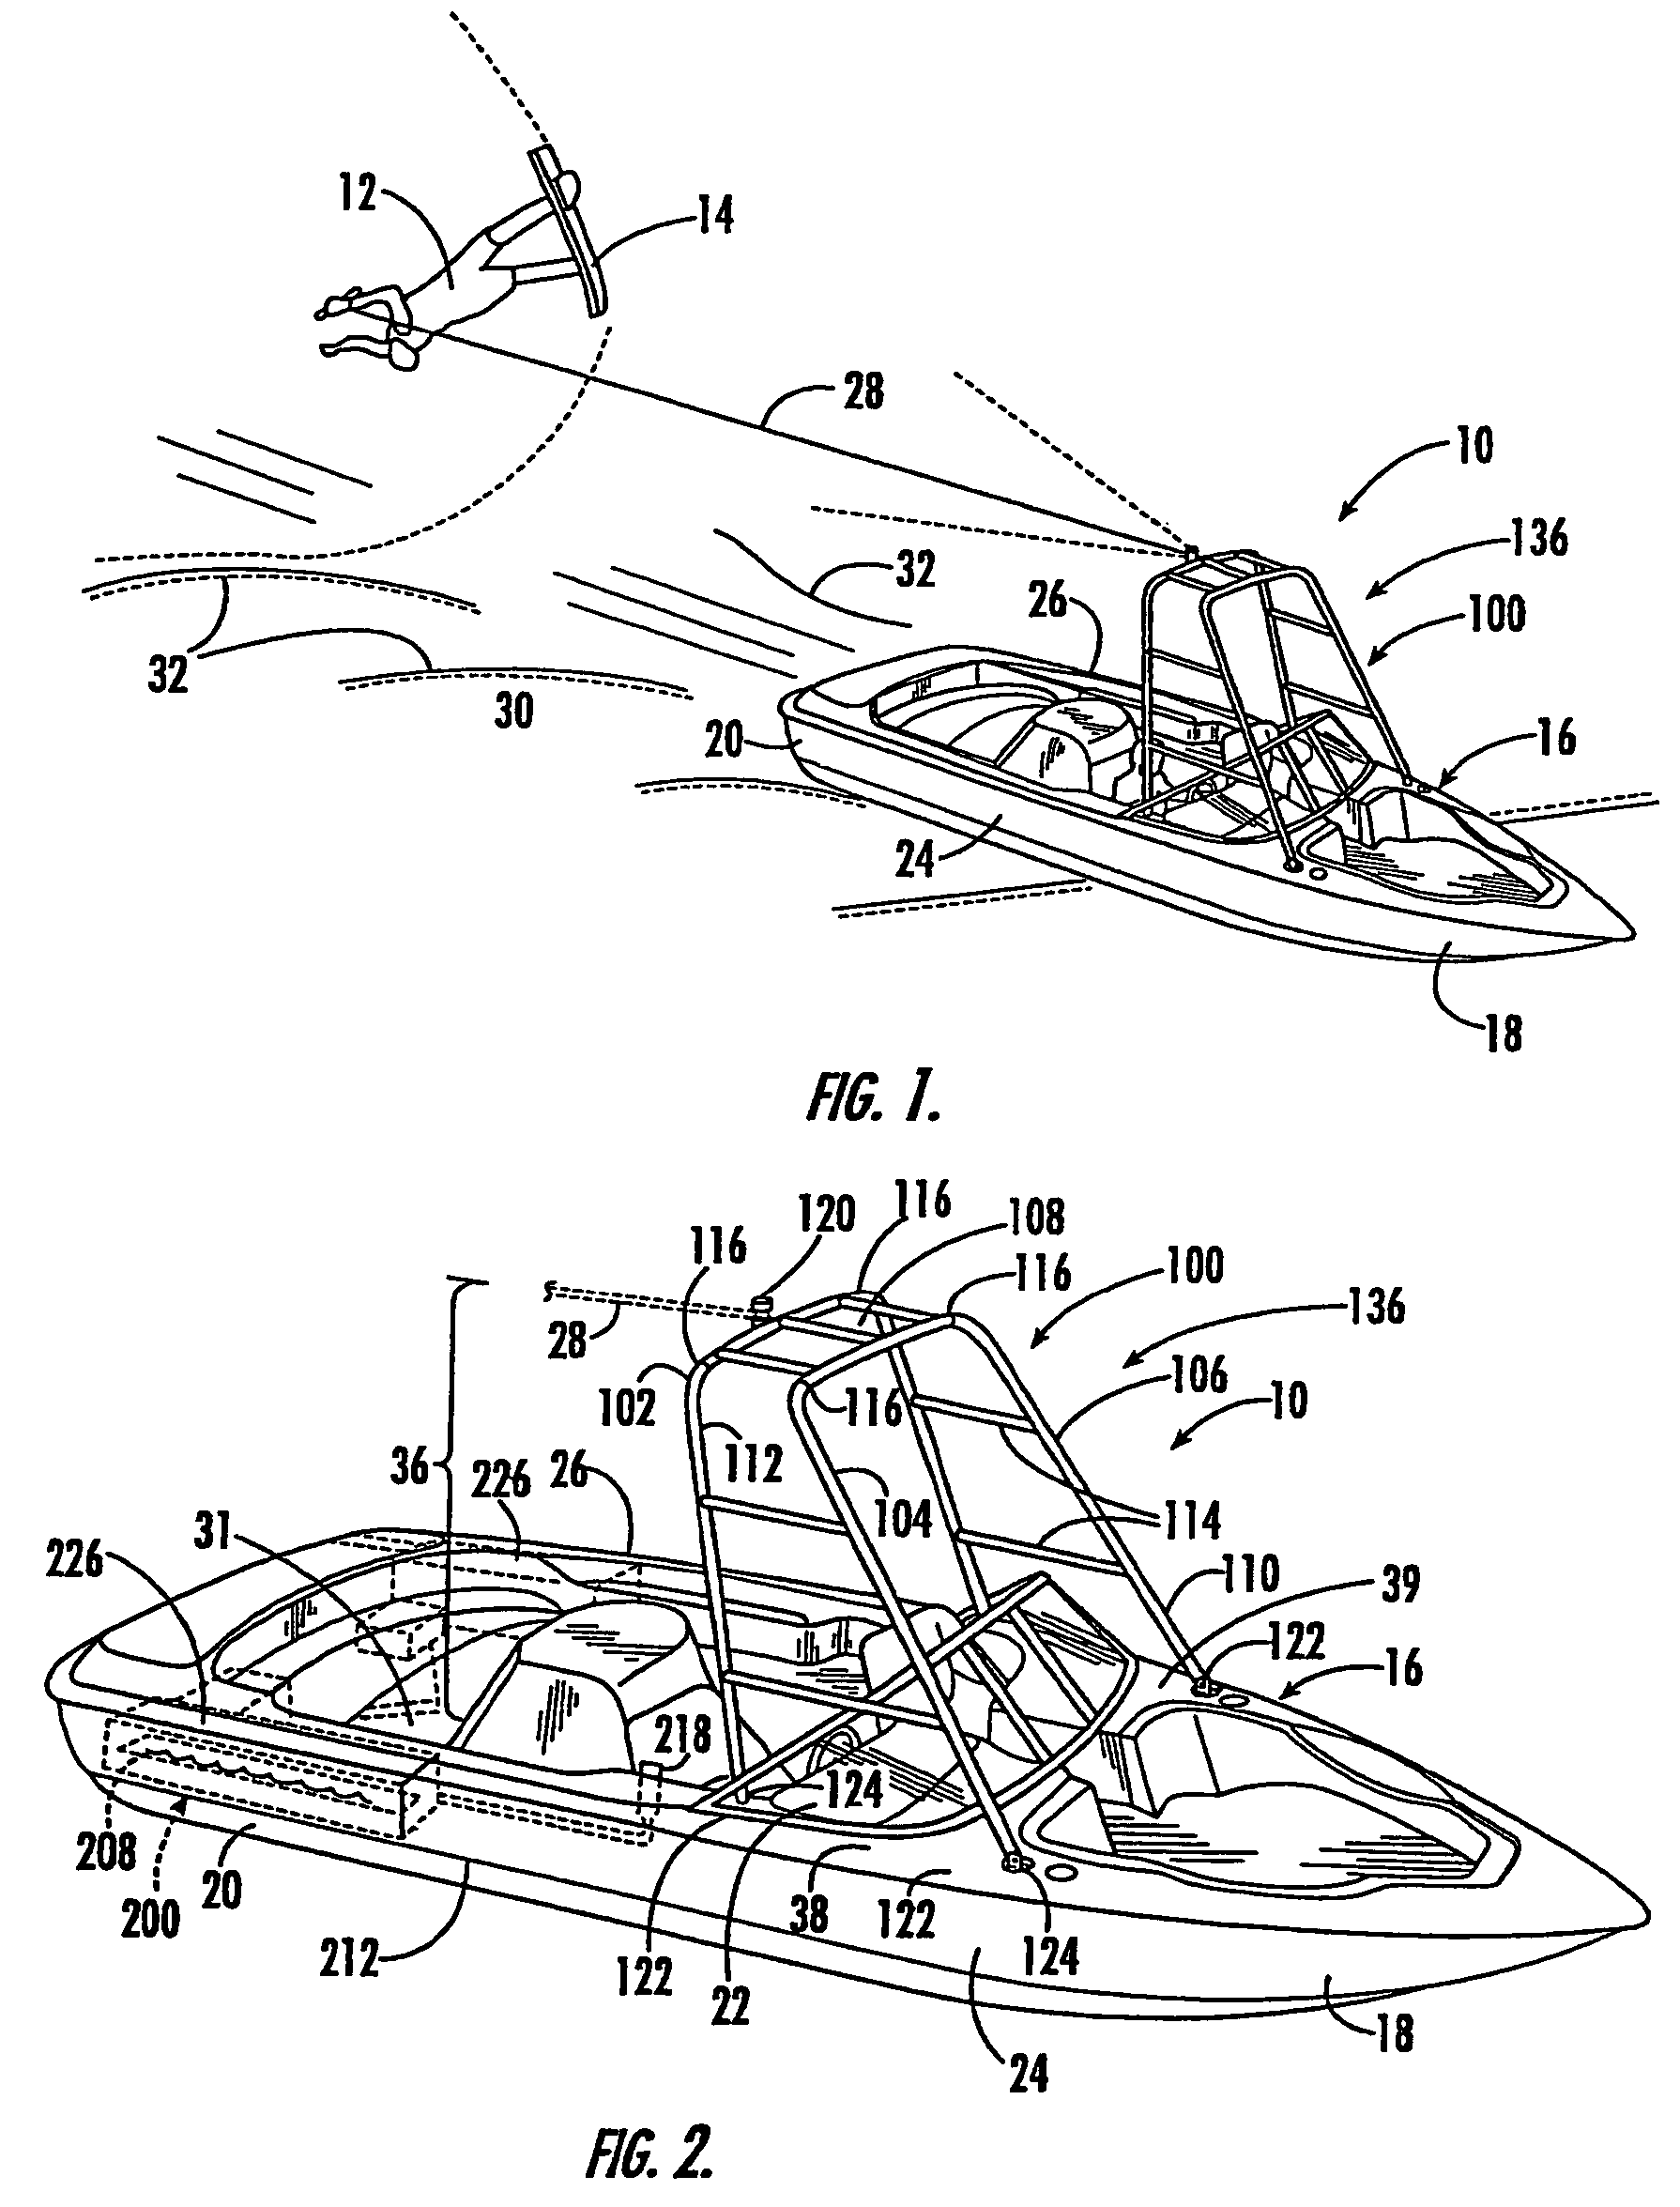 Water sport towing apparatus